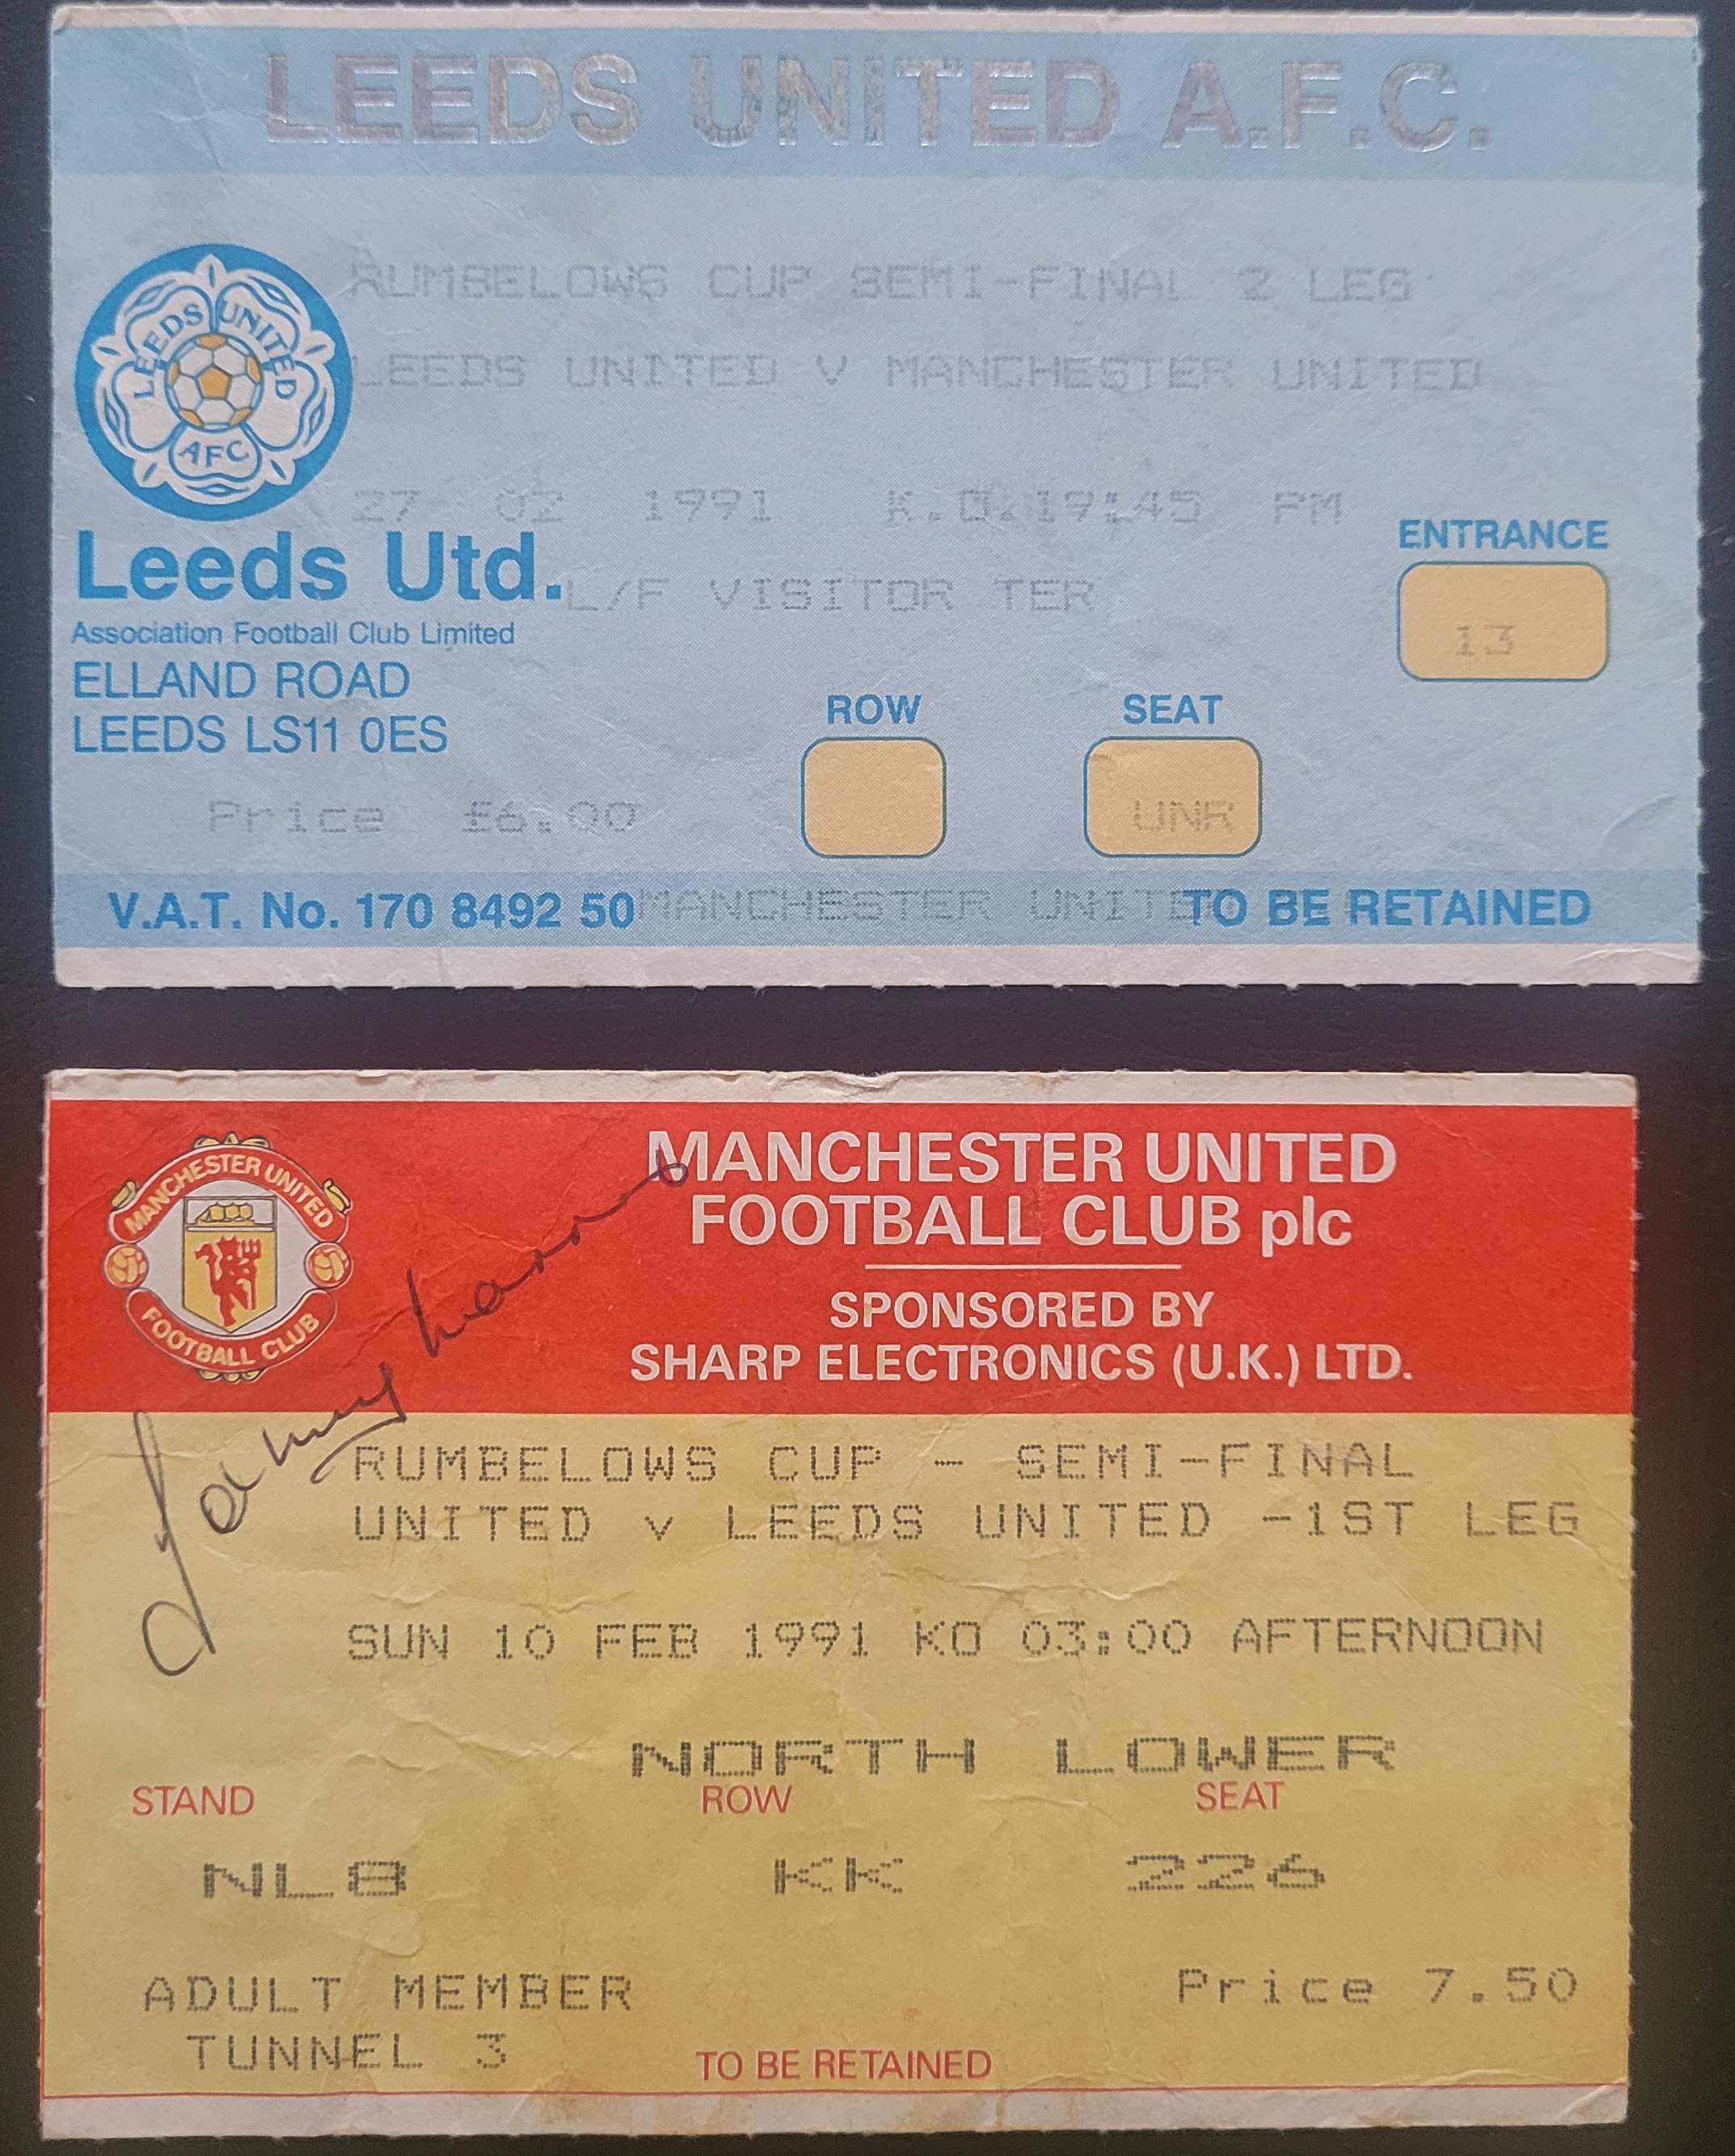 1990-91 LEAGUE CUP SEMI-FINAL MANCHESTER UNITED V LEEDS UNITED TICKET'S FOR BOTH LEGS